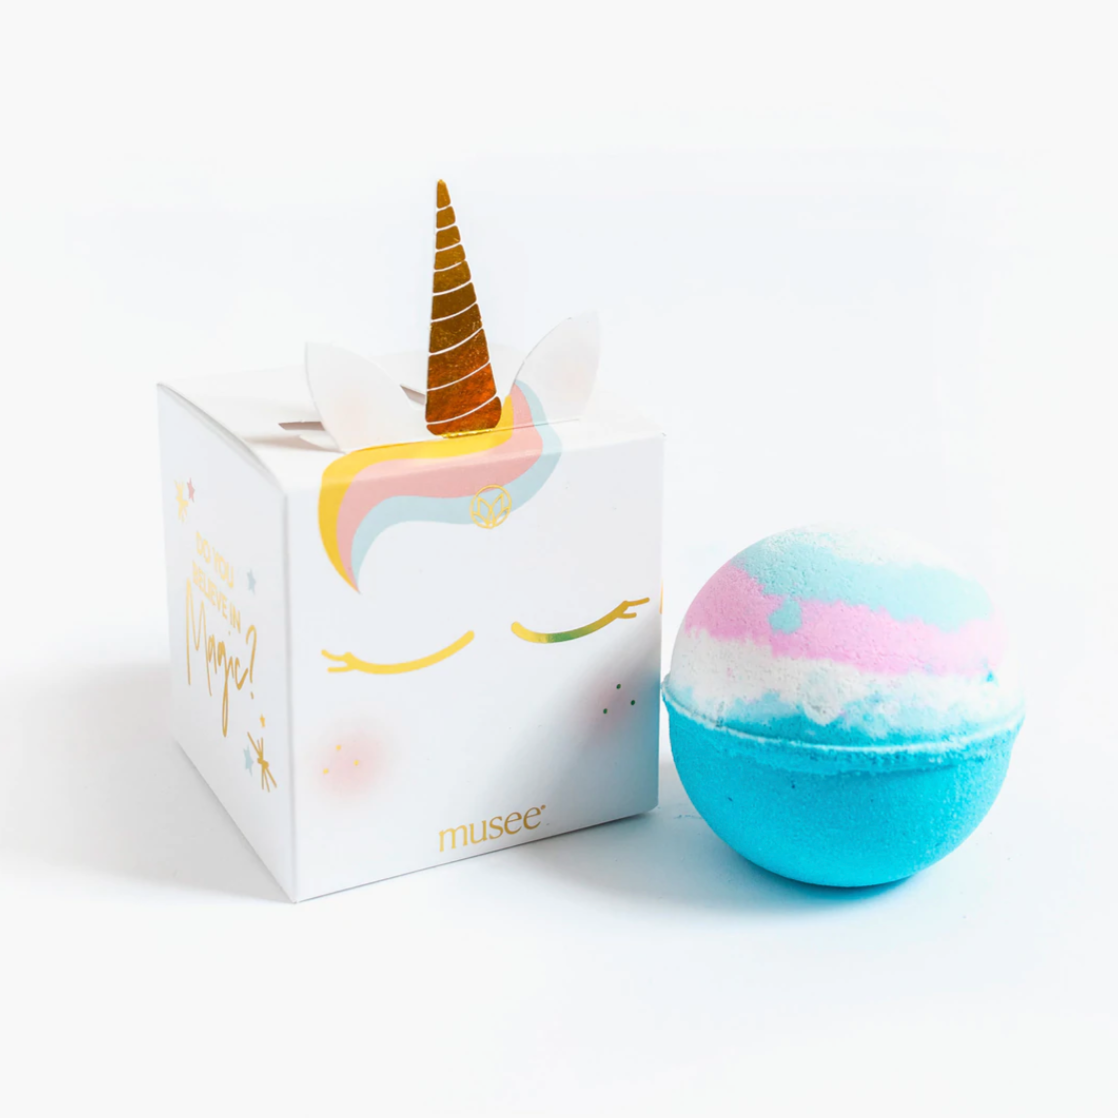 Image shows the packing of the Unicorn Bath Bomb to the left, at a slight slant with the side showing which reads "Do you believe in magic?" and the blue, pink and white bath bomb to the right.